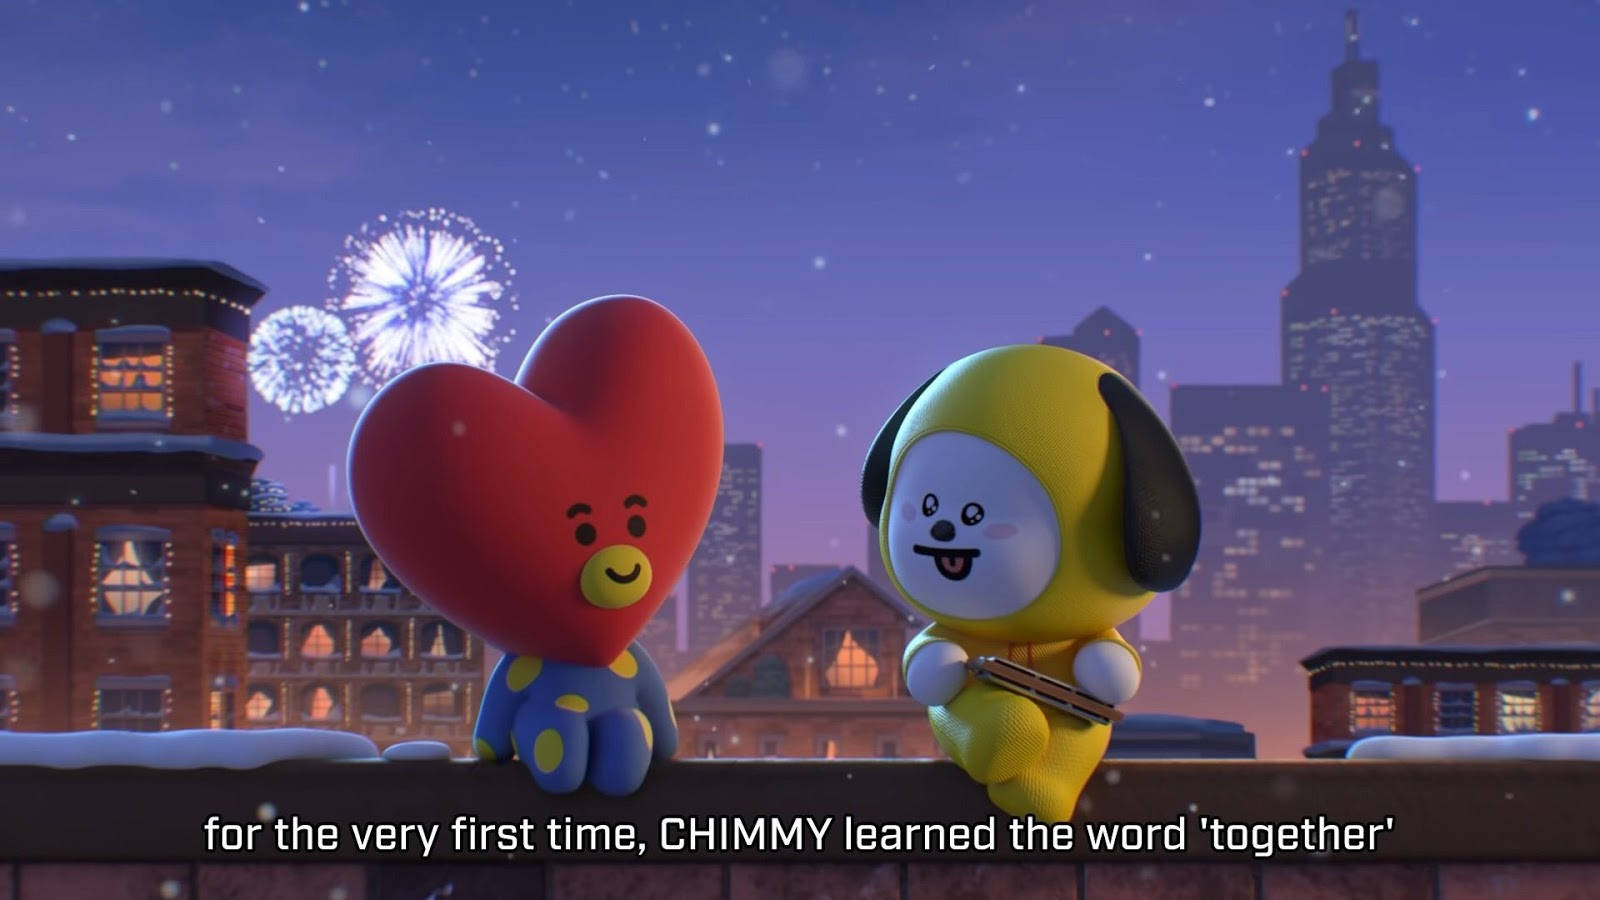 Tata And Chimmy Bt21 Wallpaper